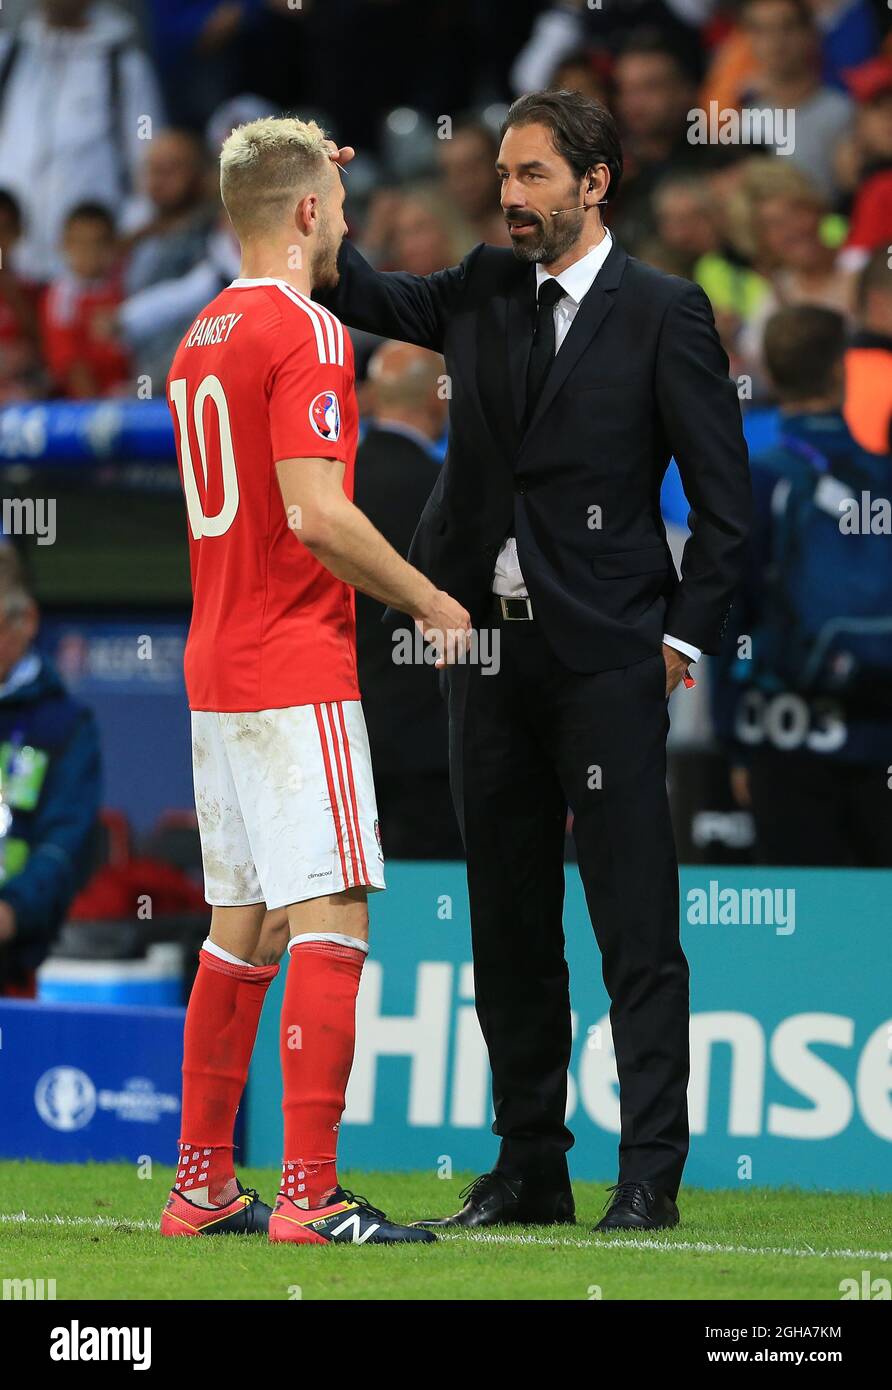 Aaron Ramsey of Wales talks to former Arsenal Robert Pires during the UEFA European Championship 2016 match at the Stadium Pierre Mauroy, Lille. Picture date July 01, 2016 Pic David Klein/Sportimage via PA Images Stock Photo